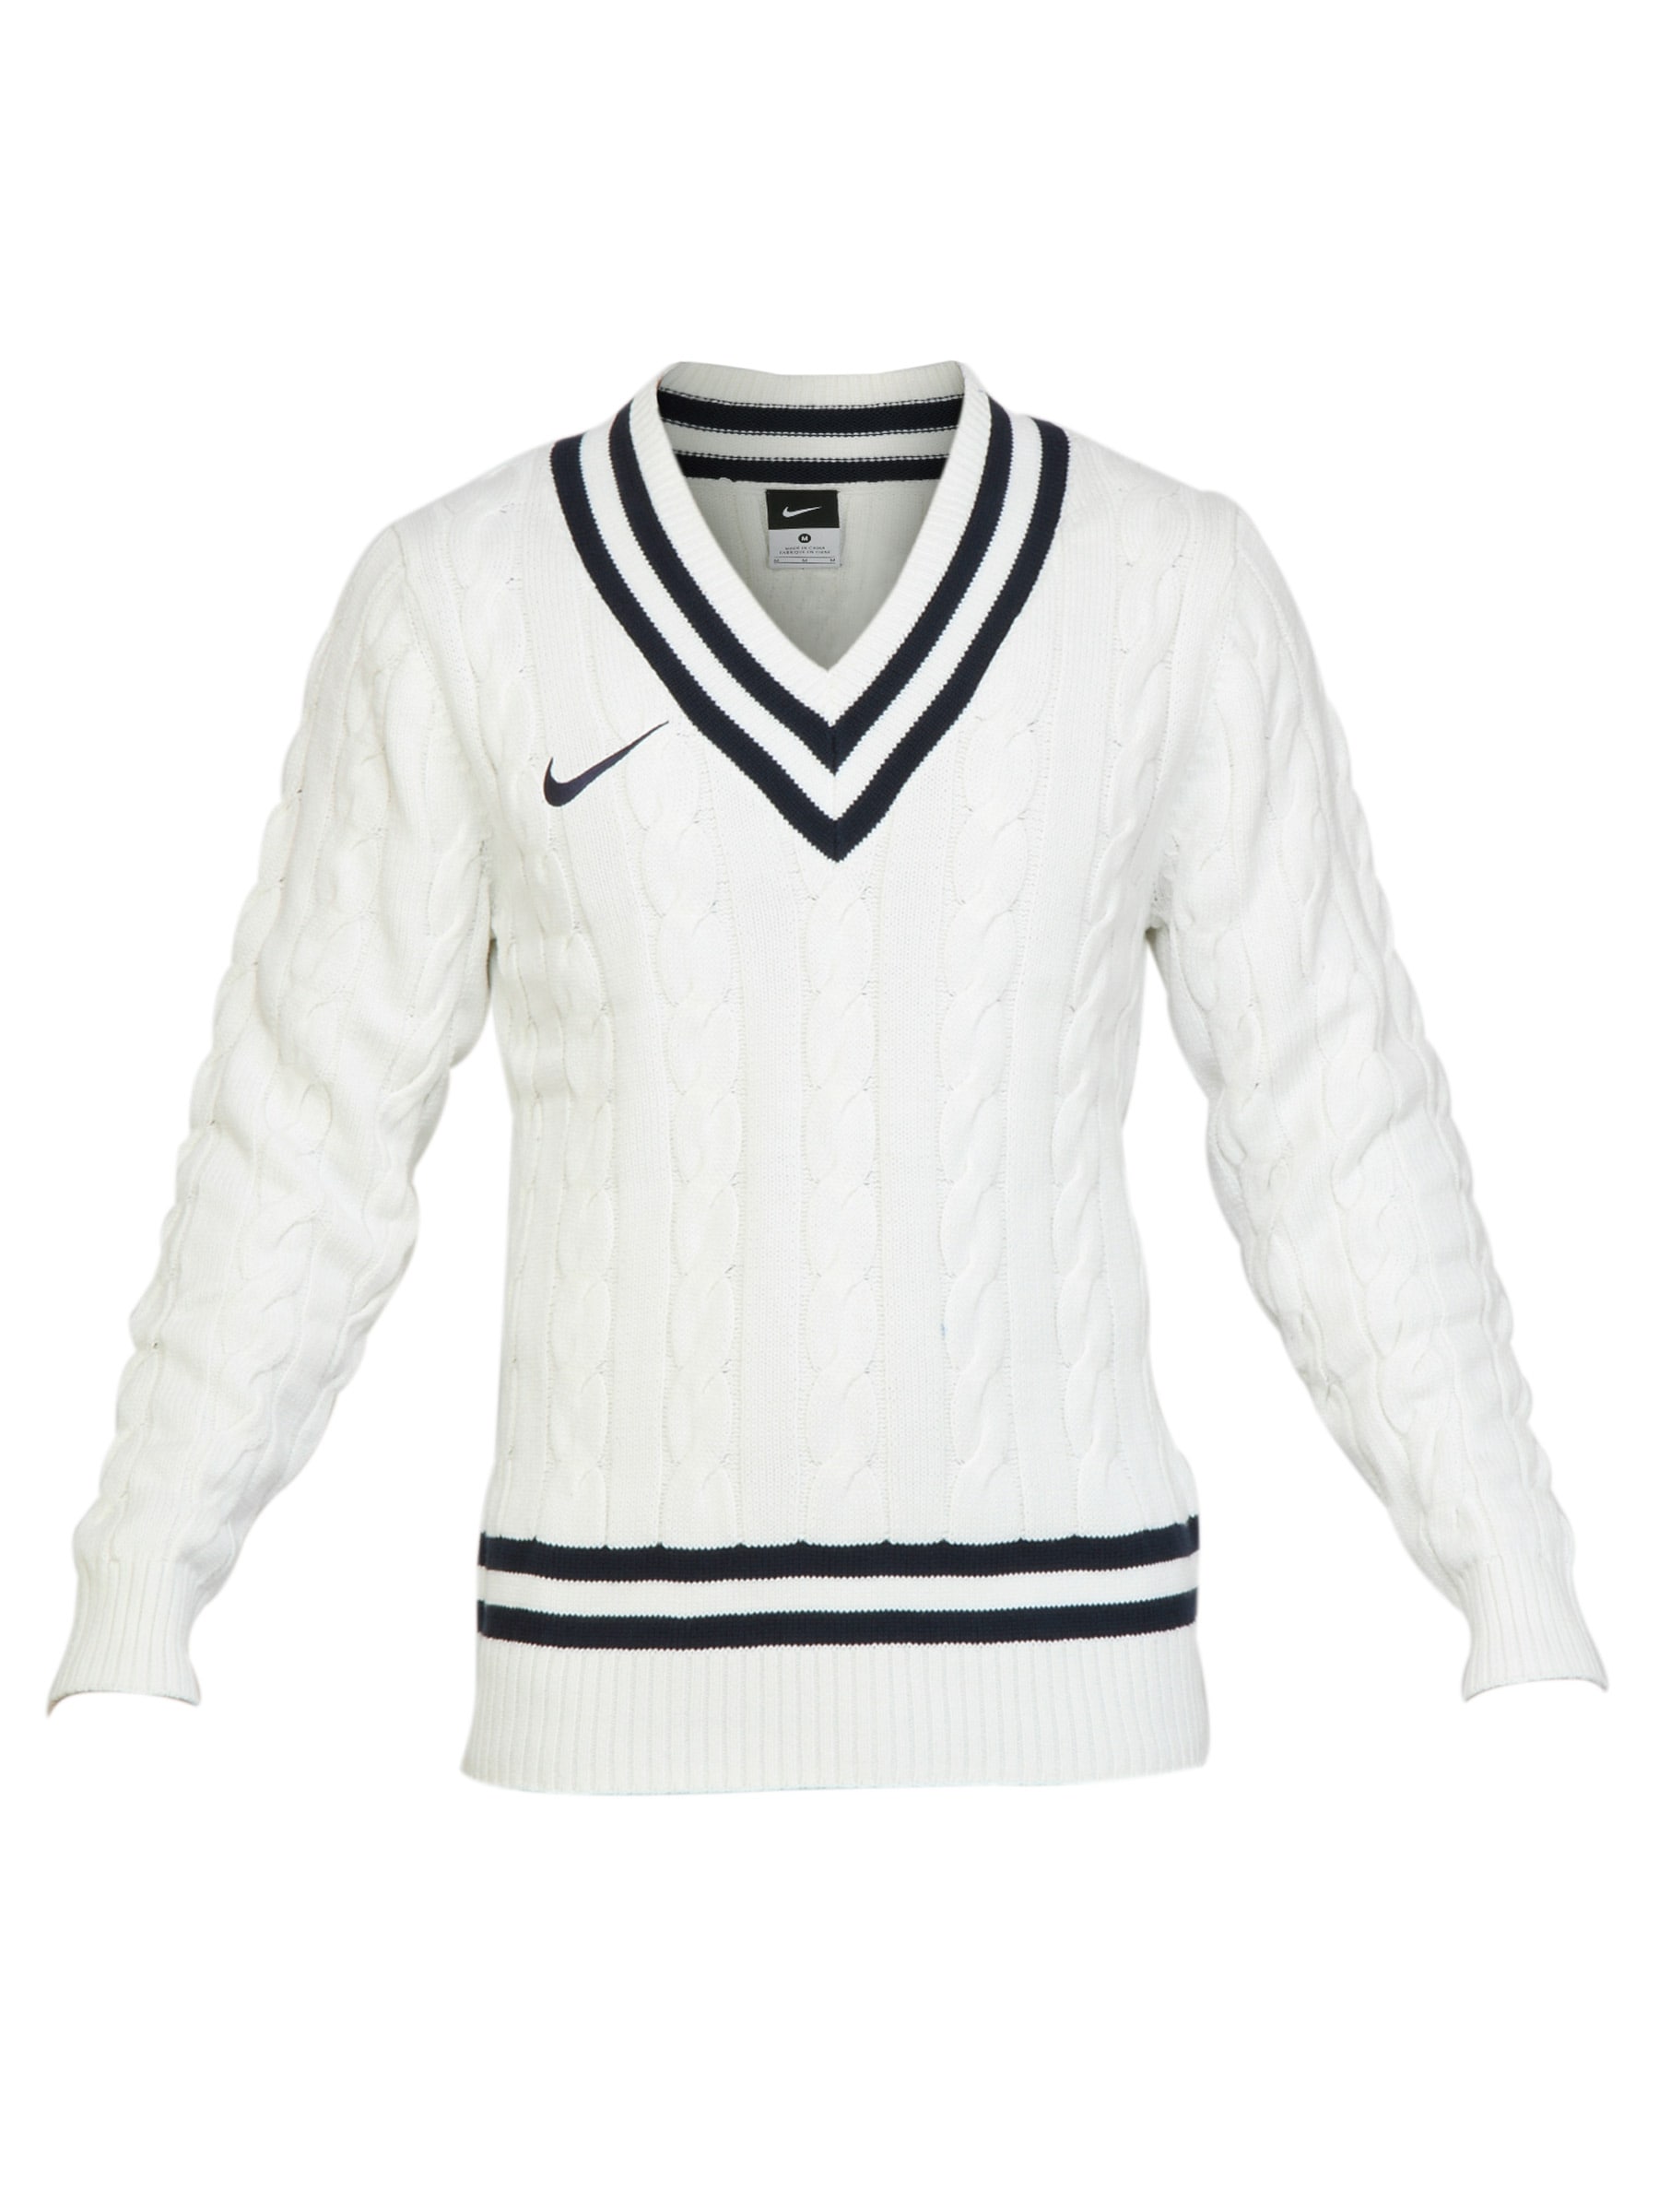 Nike Men Solid White Sweaters